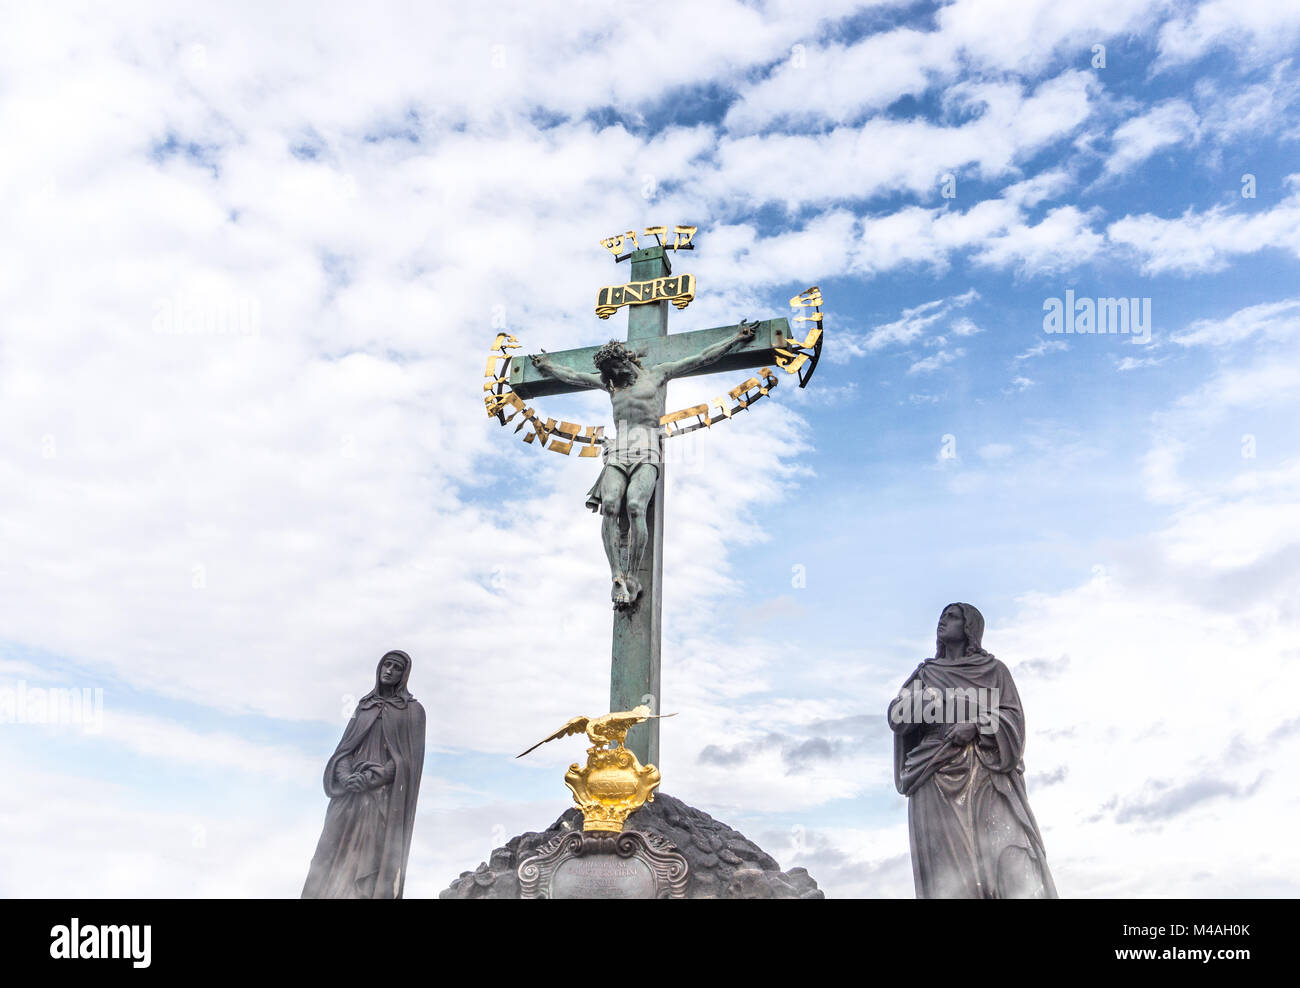 Jesus hanging on the cross in a statue. Inri sculpture against blue partly cloudy sky. Stock Photo